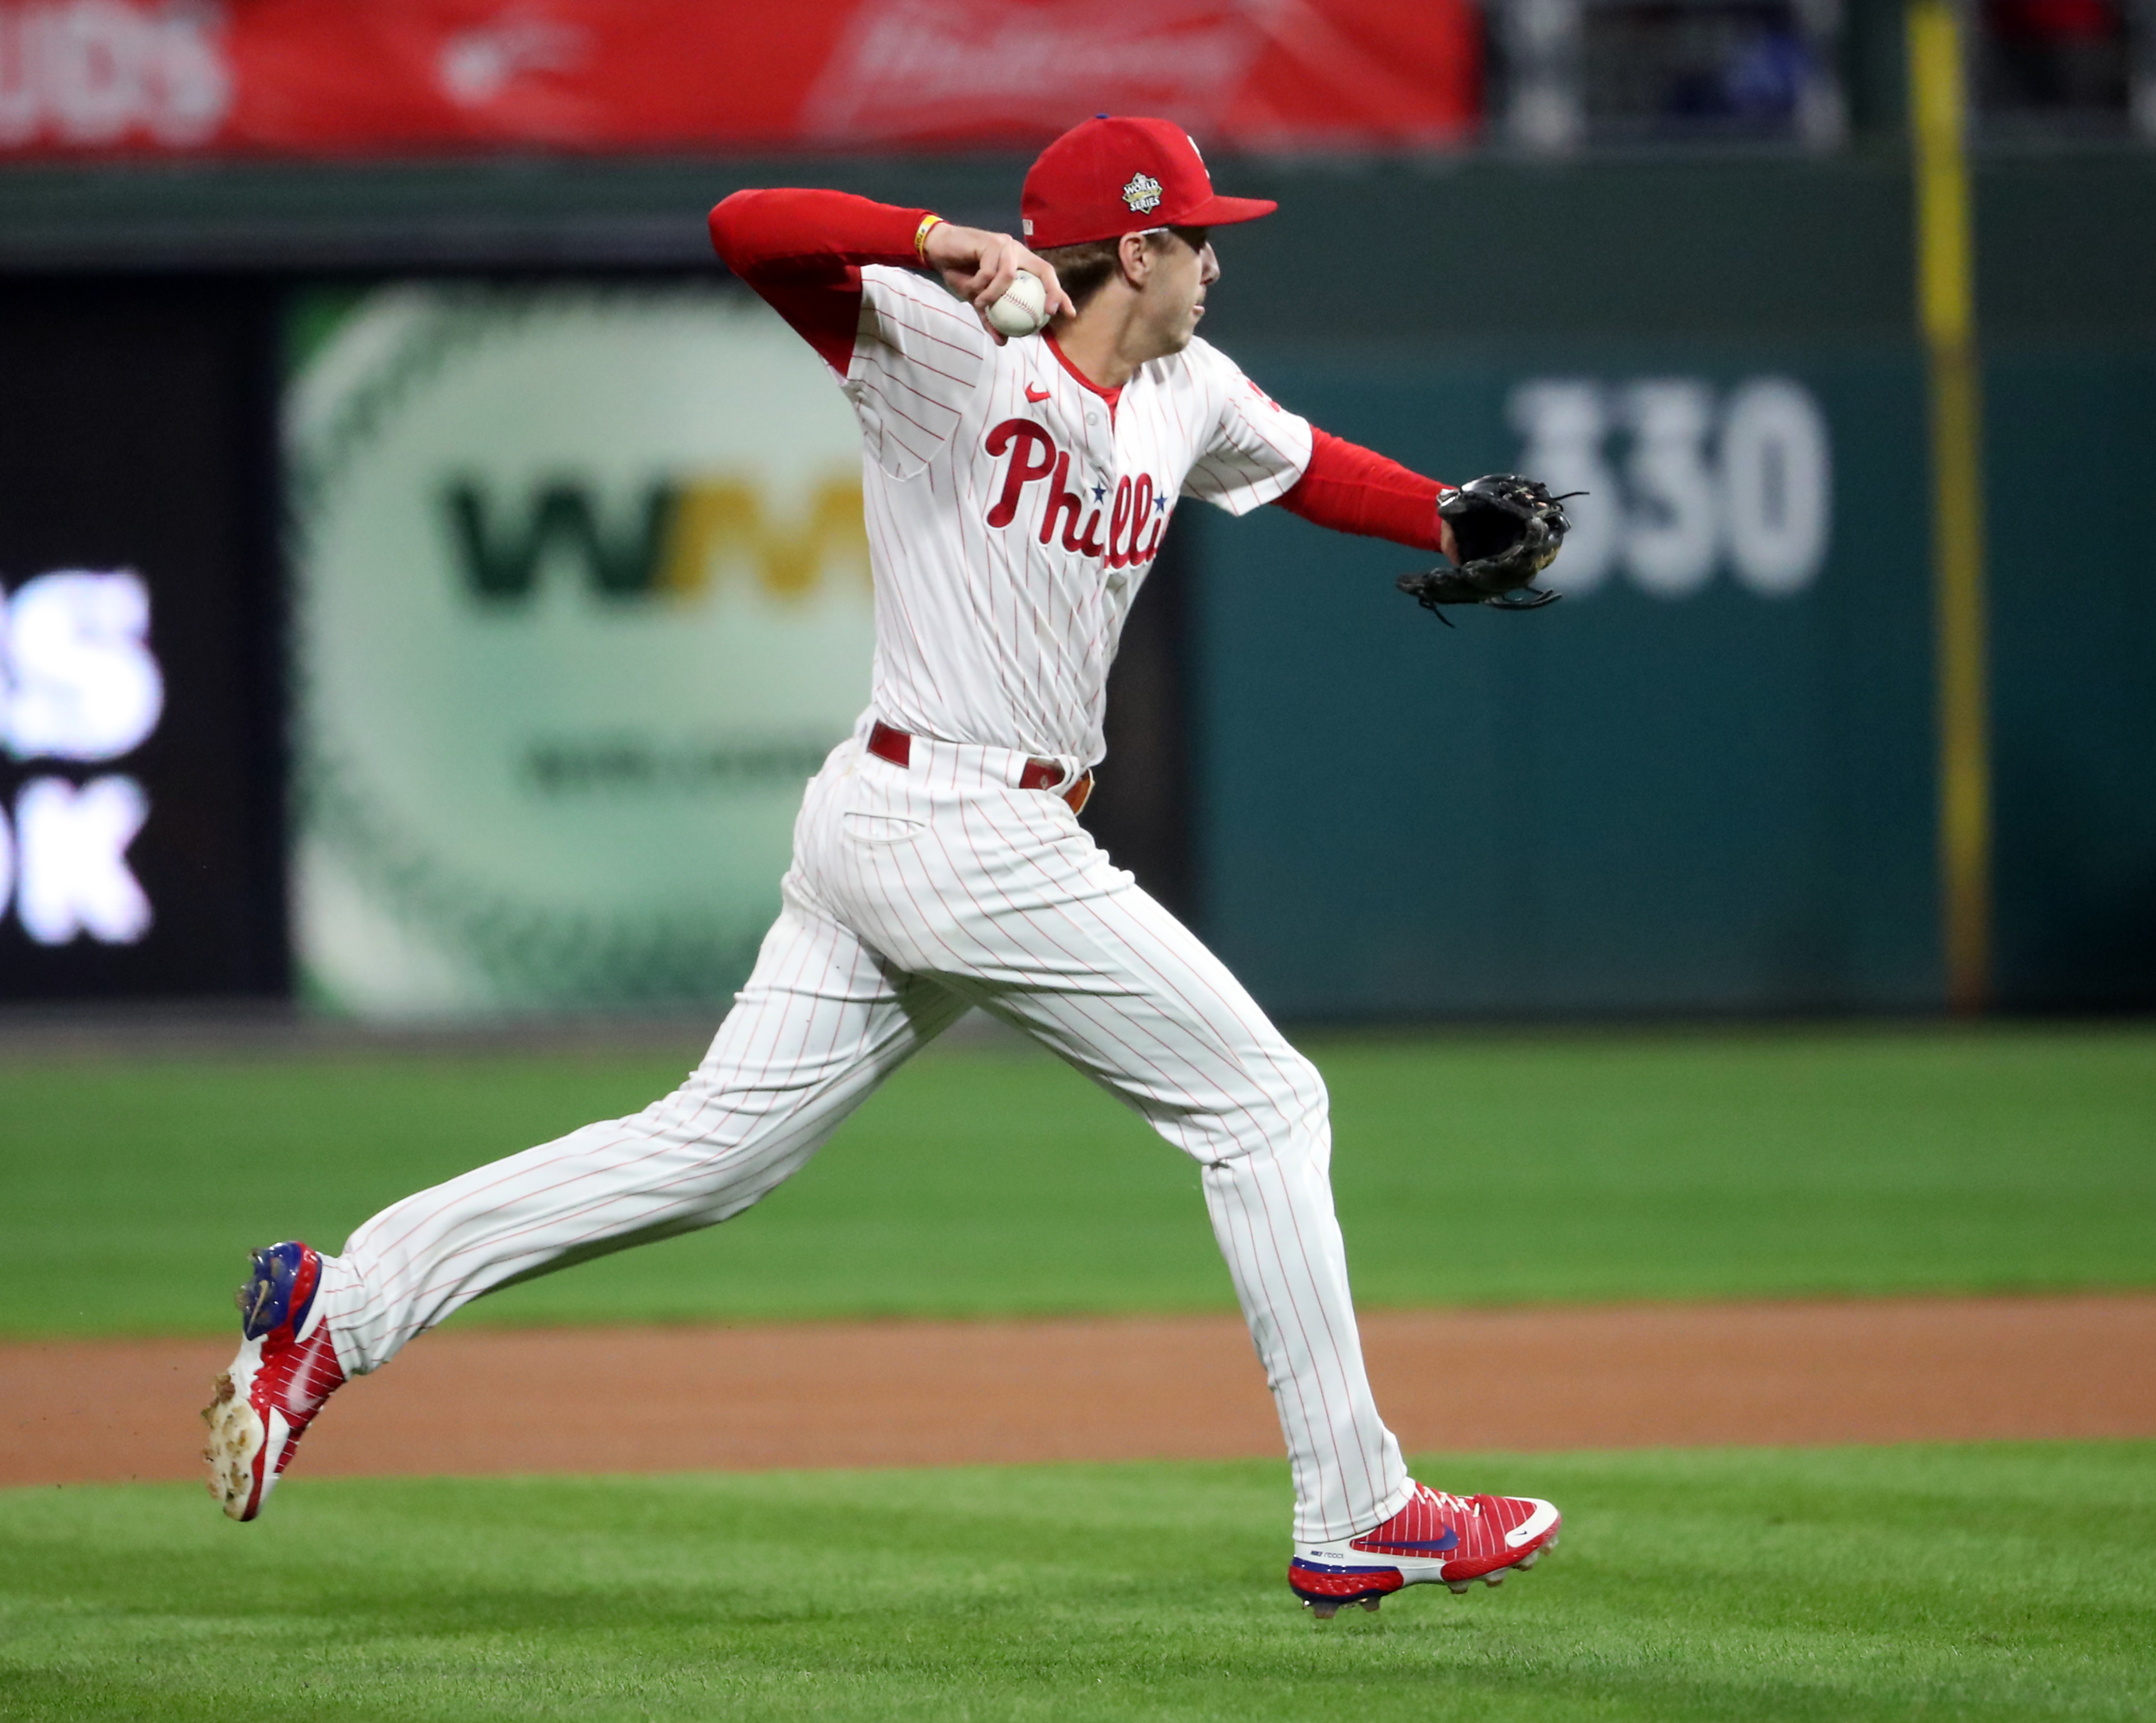 Bryson Stott (5) of the Philadelphia Phillies throws to first for the out in the first inning during World Series Game 3 against the Houston Astros at Citizens Bank Park, Tuesday, Nov. 1, 2022.